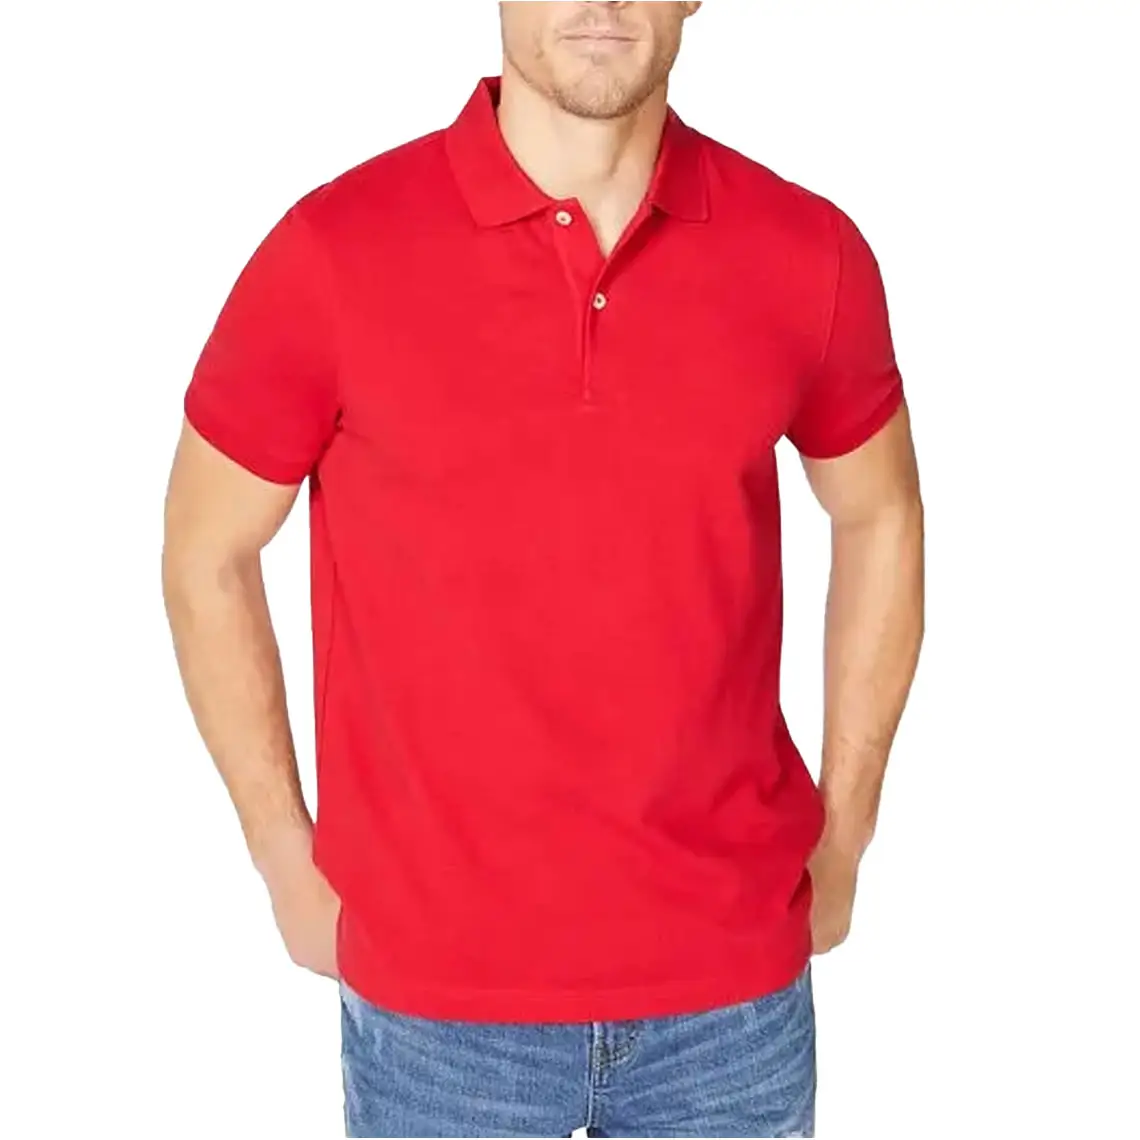 2023 Durable Comfortable Fabric Best Price Men Polo Shirts Latest Design Custom Size cheap price Polo Shirts